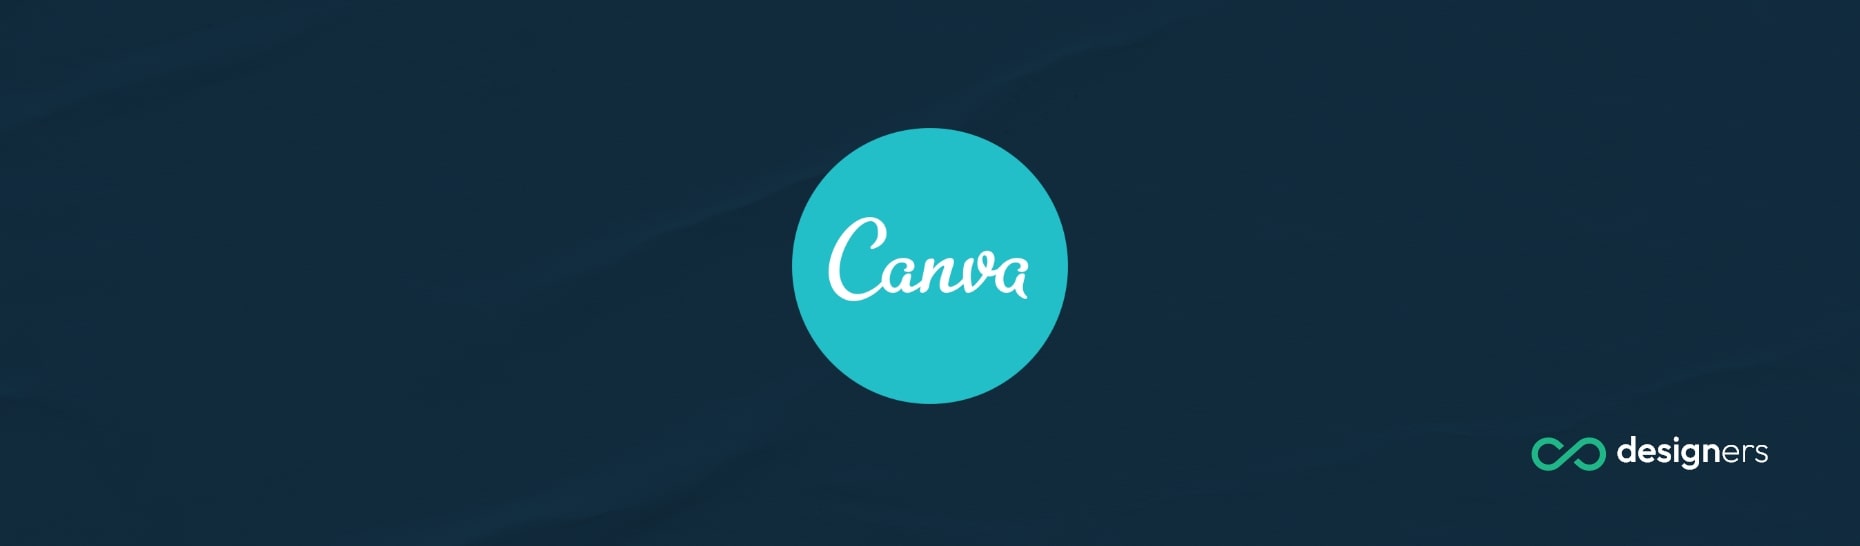 How to Change Text Color in Canva? 